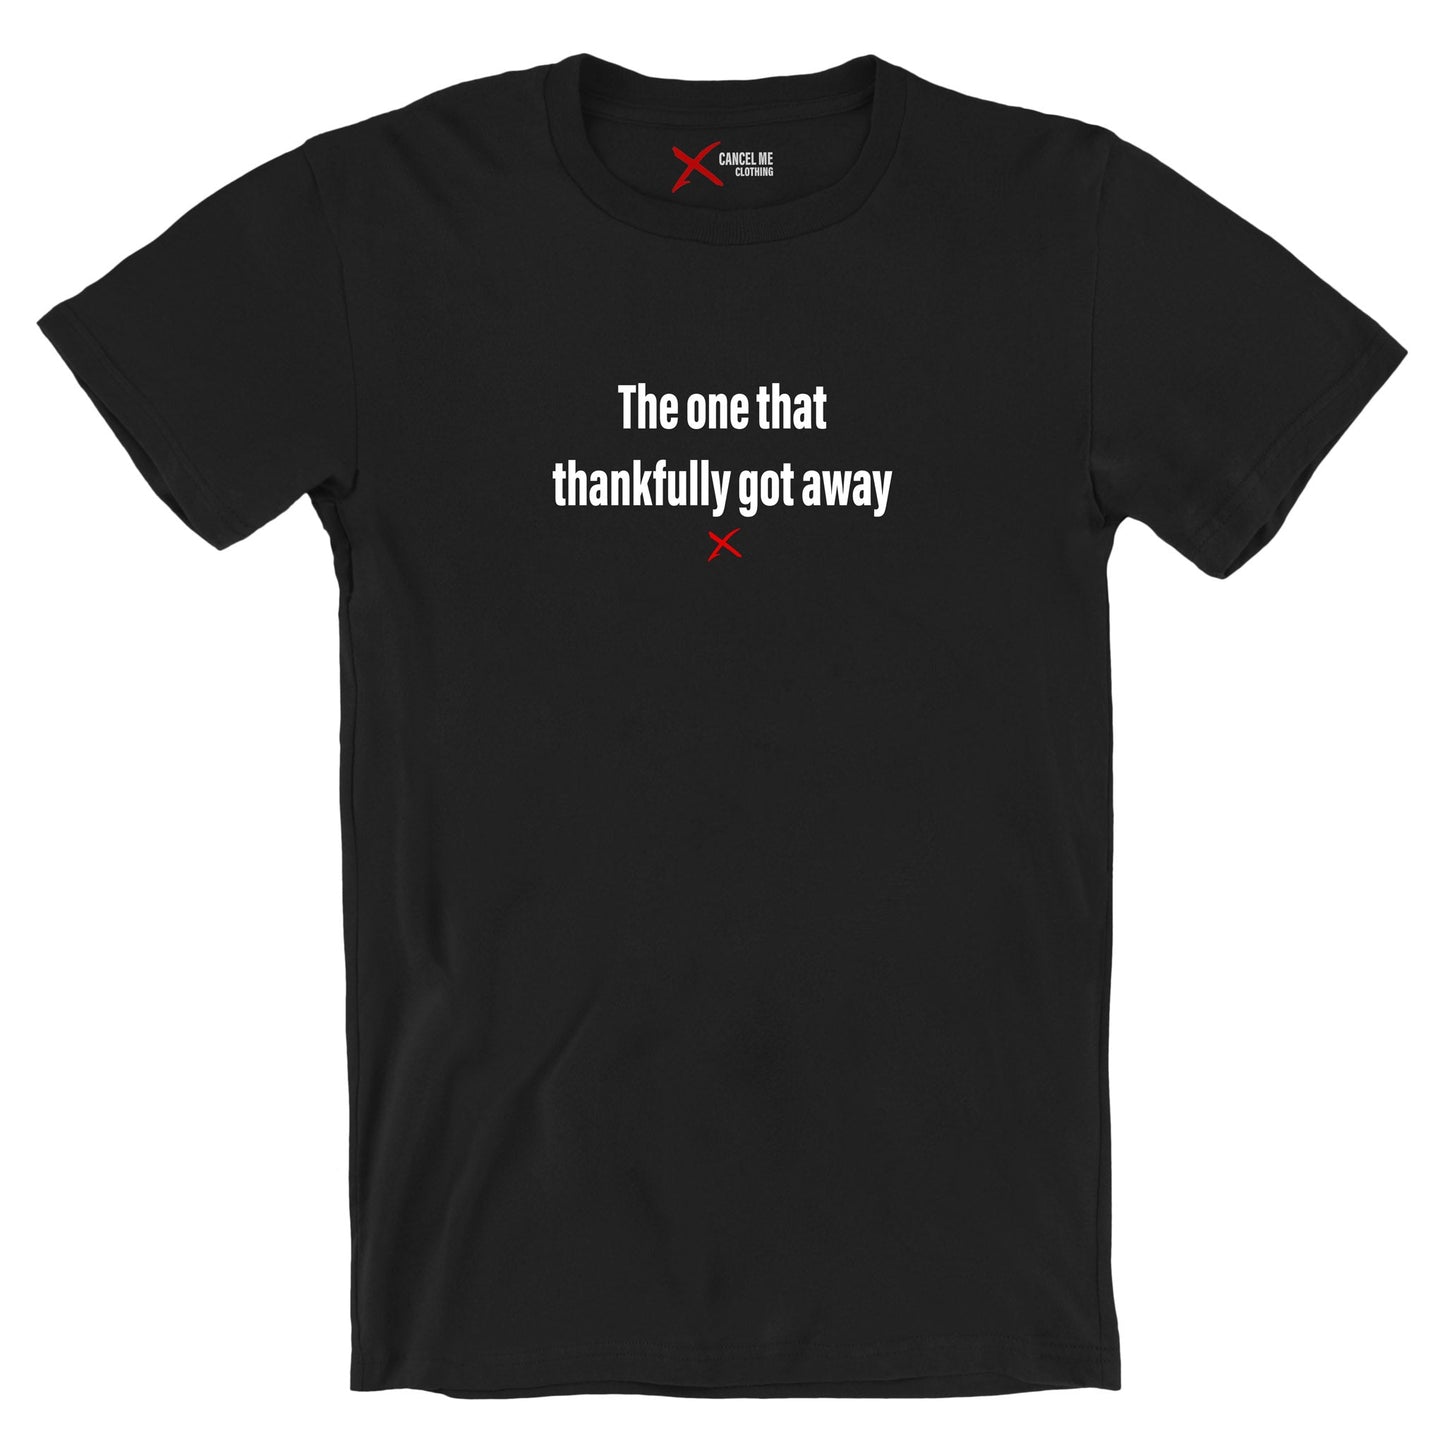 The one that thankfully got away - Shirt